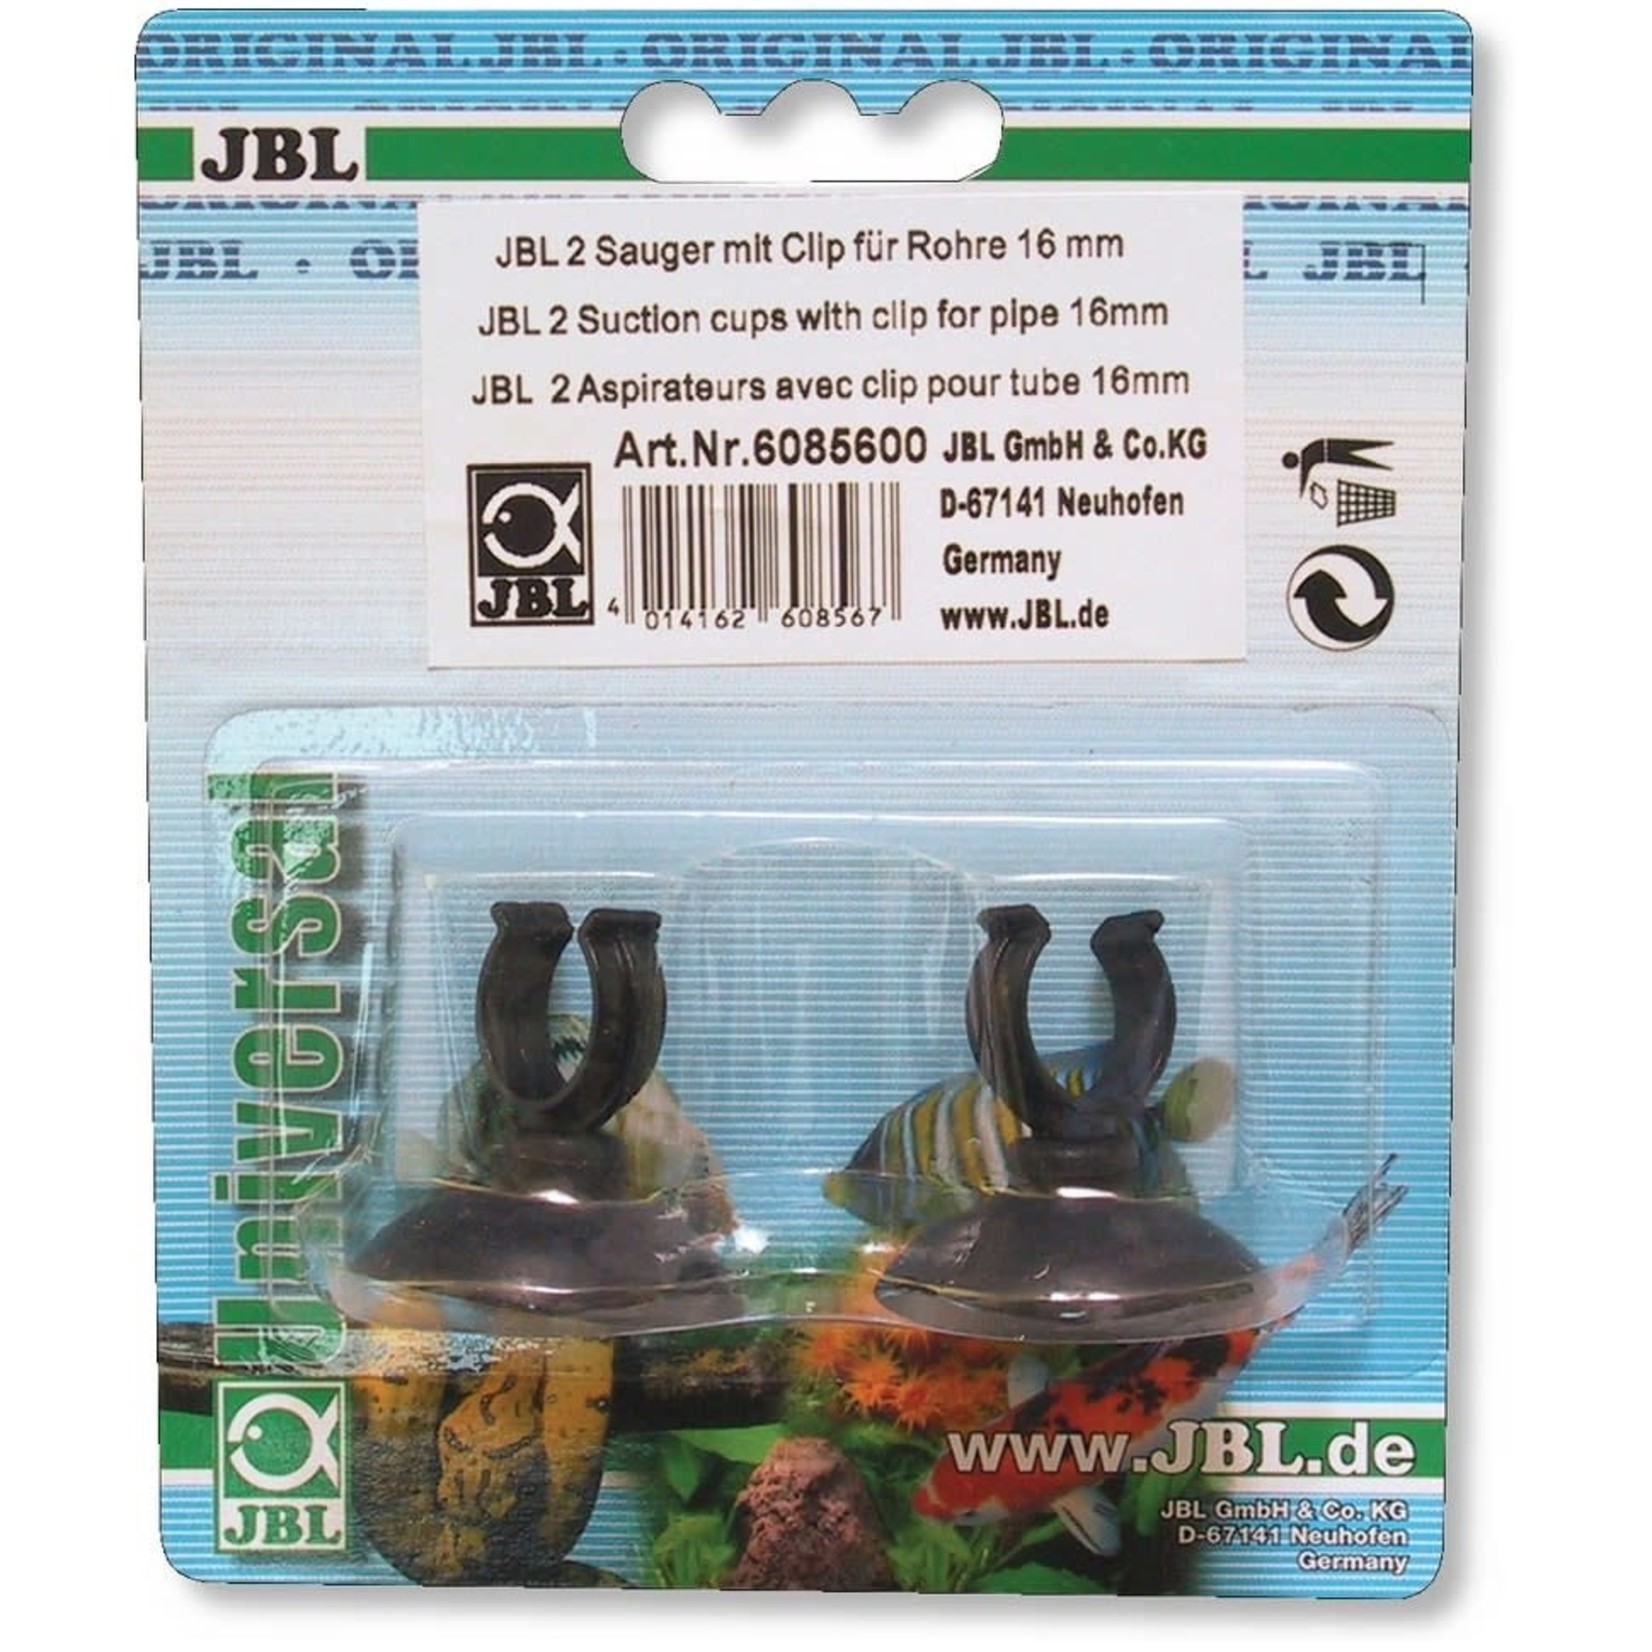 JBL JBL suction cup with clip, 16 mm - Set of 2